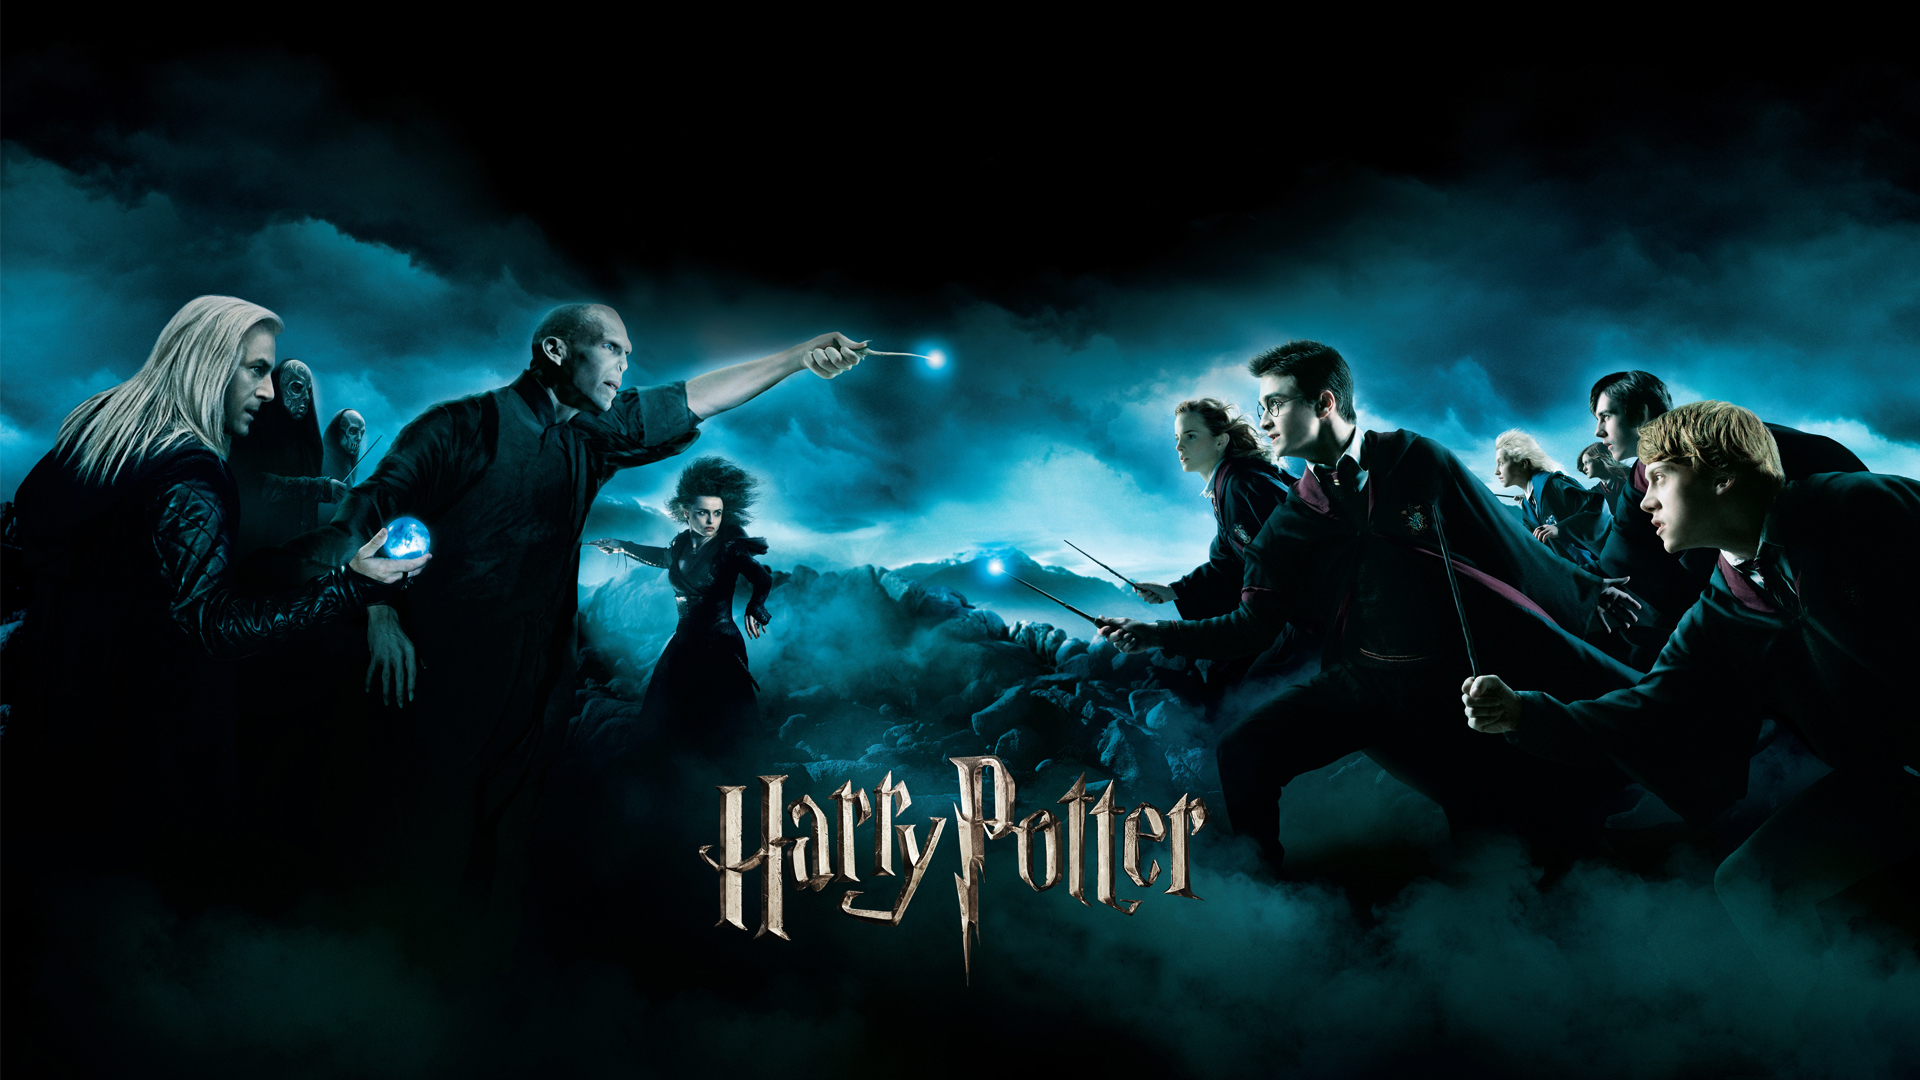 50+] Harry Potter Images and Wallpapers - WallpaperSafari